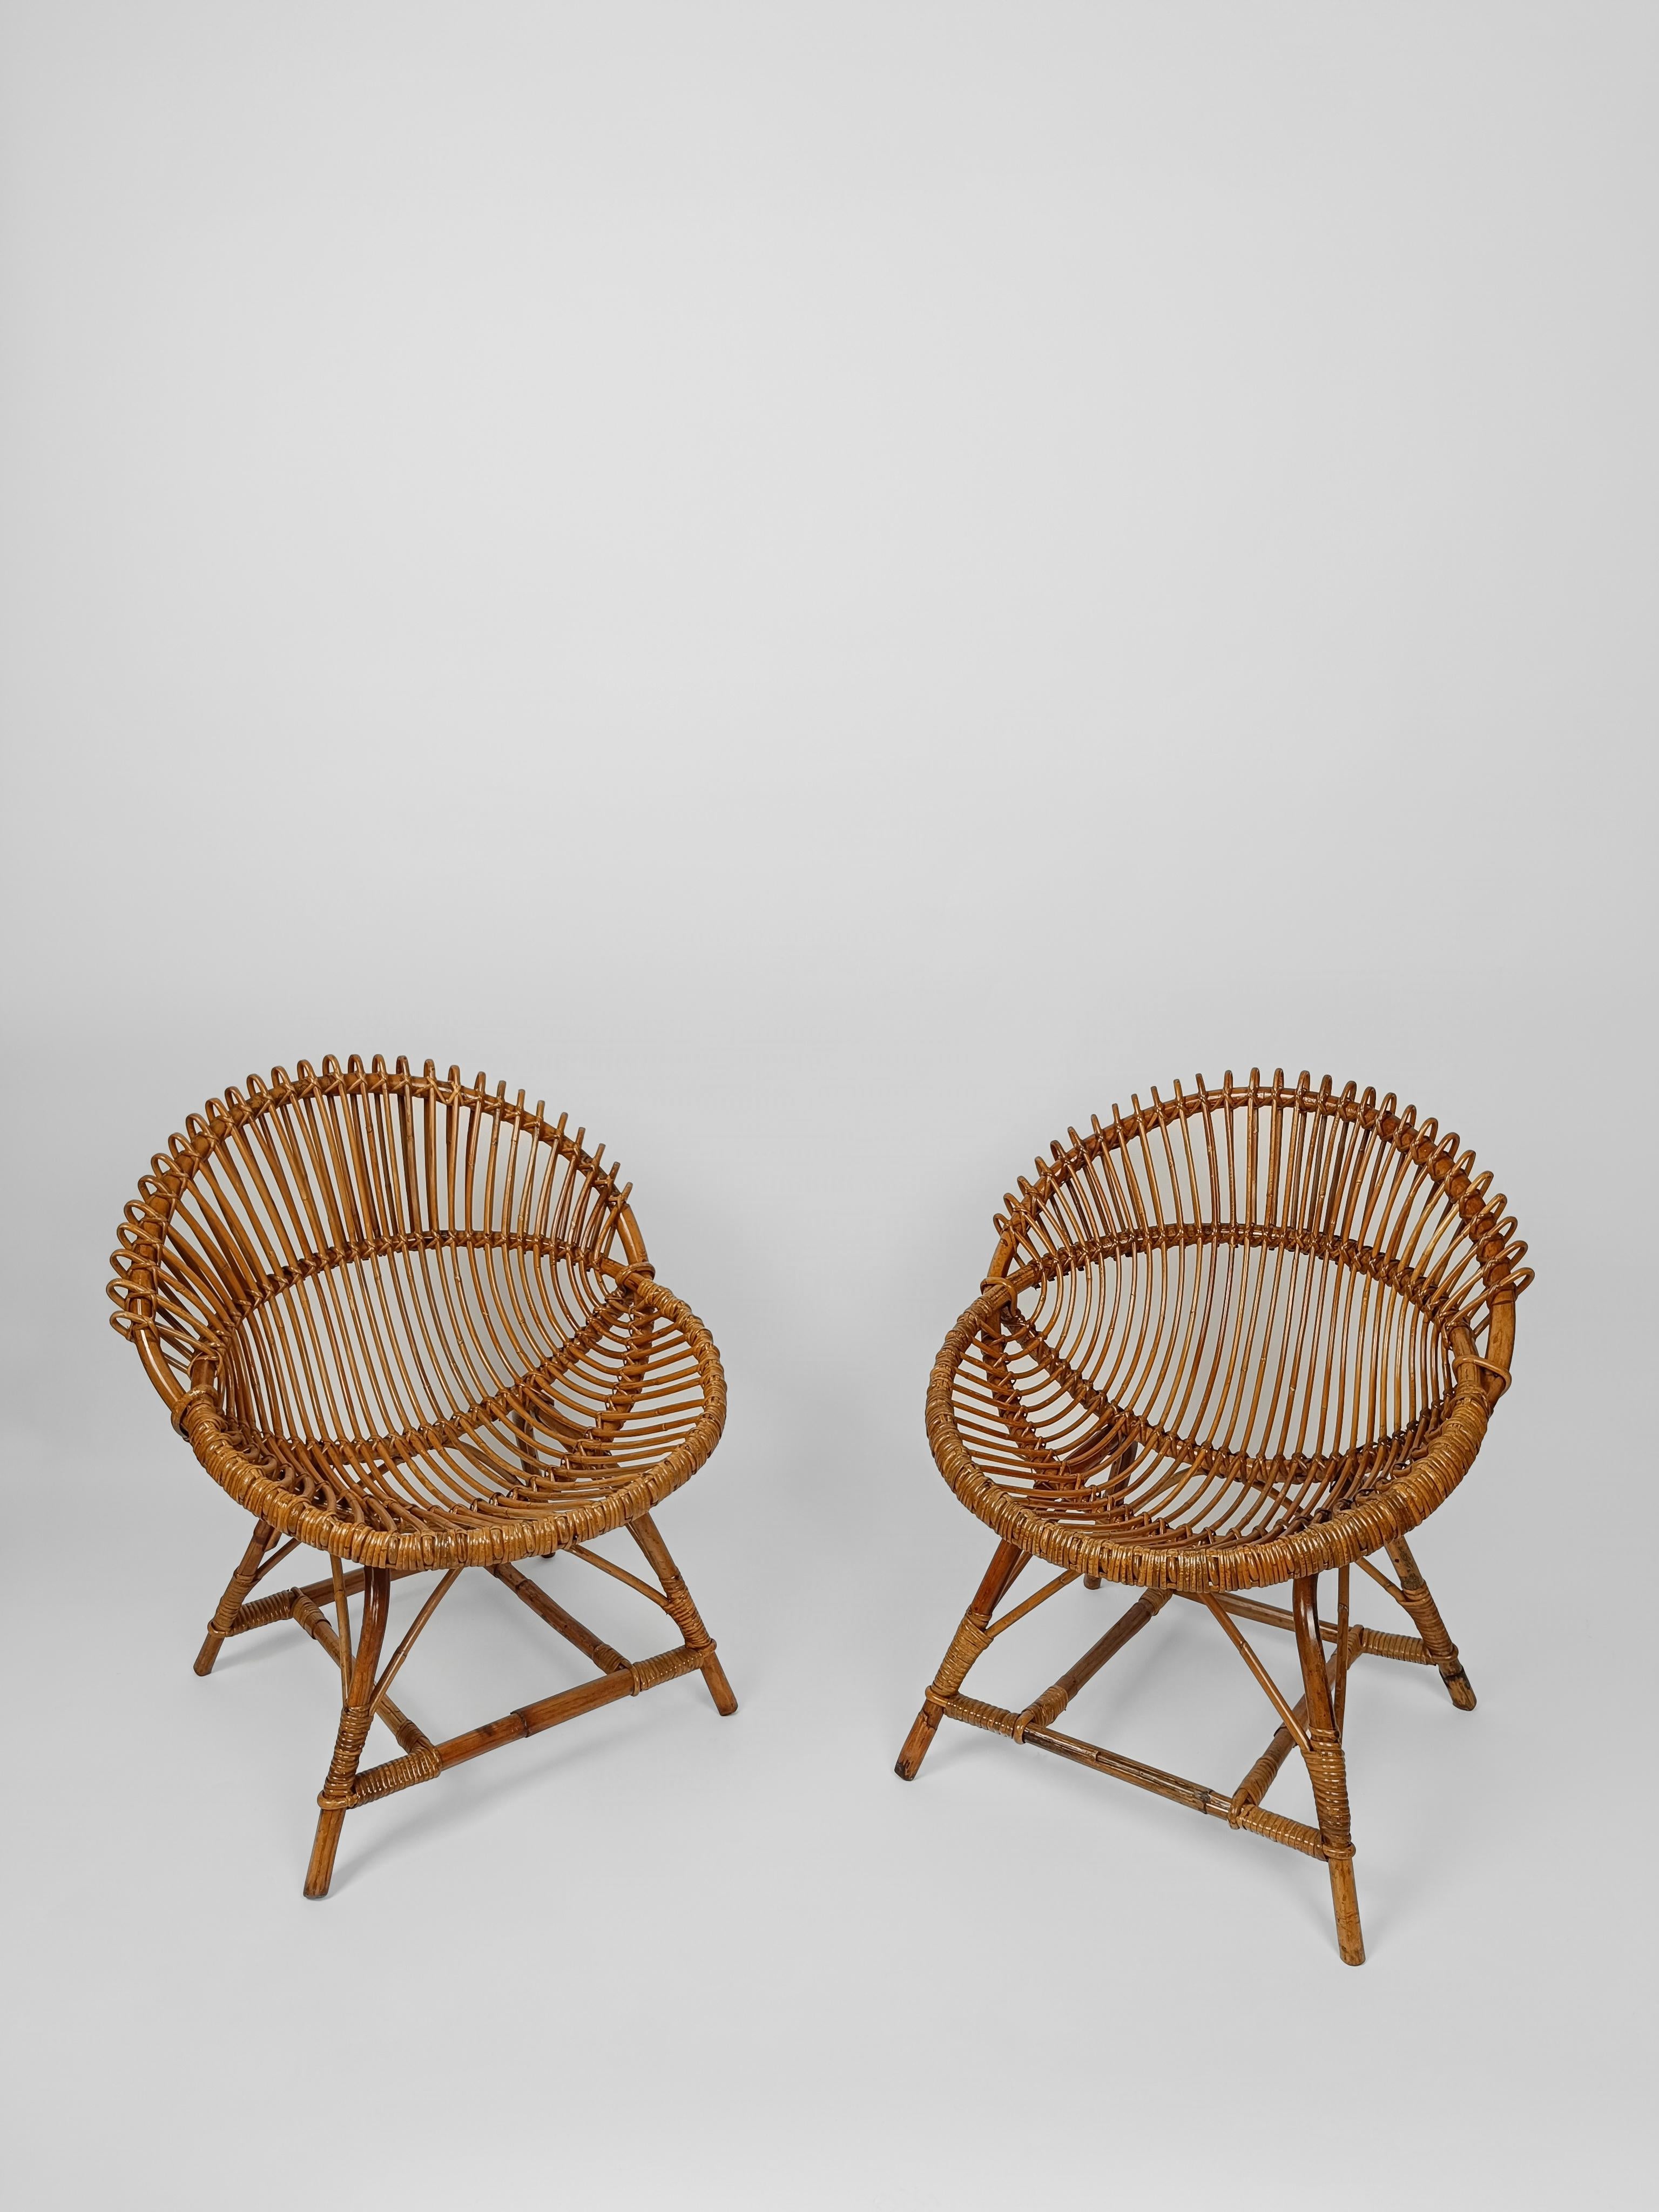 20th Century Vintage Cane and Rattan Set of 2 shell-shaped Armchairs with Coffe Table, 1960s For Sale